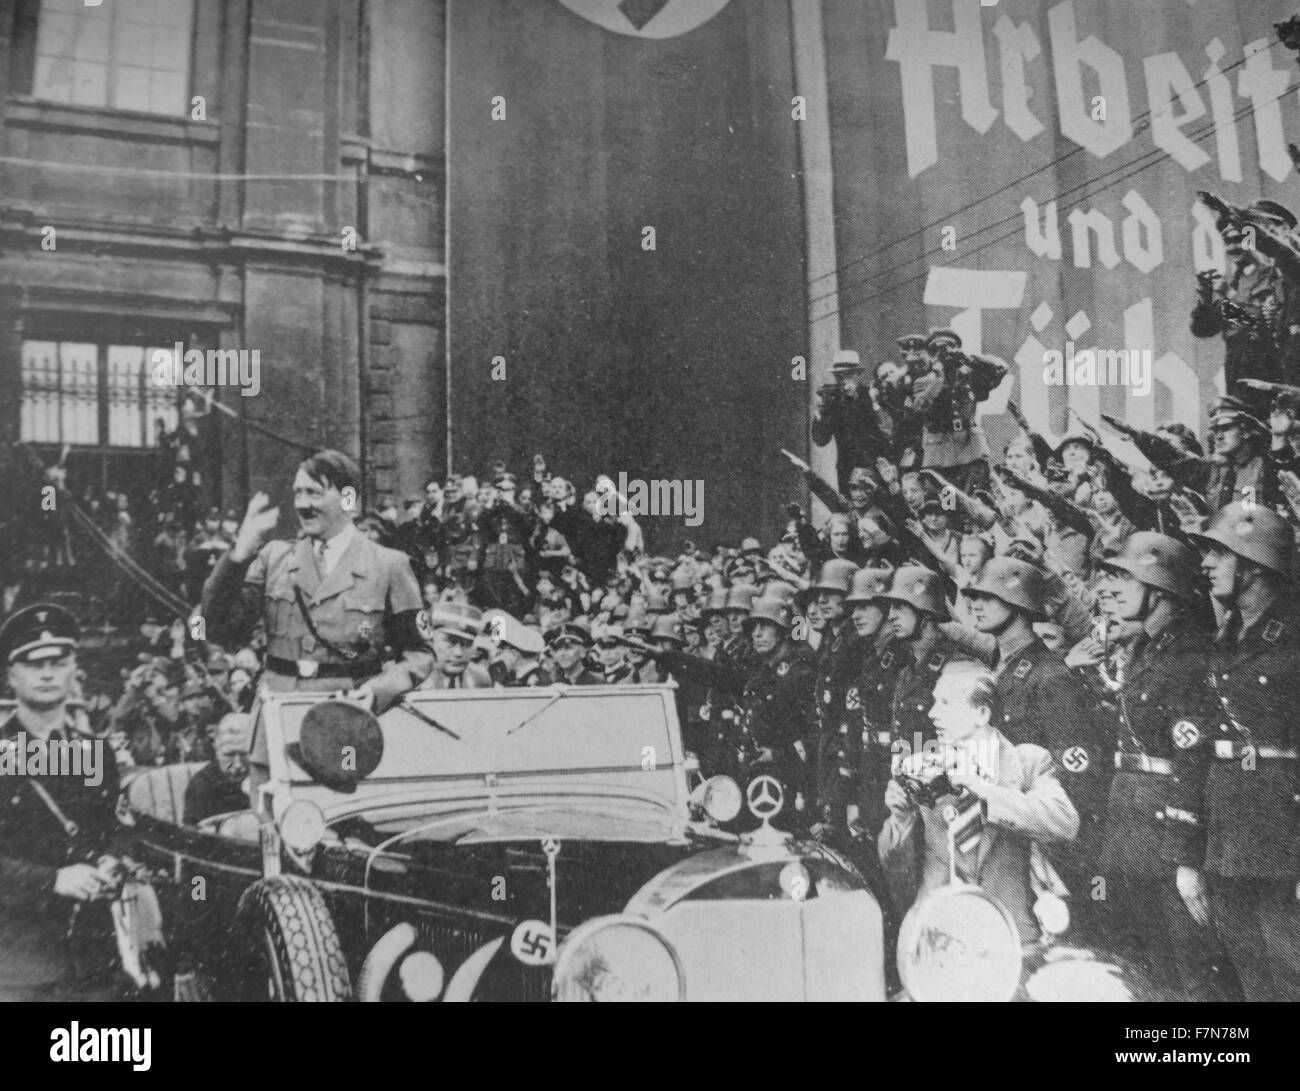 After his election as Chancellor, Adolf Hitler's popularity was evident at this May Day rally. Stock Photo